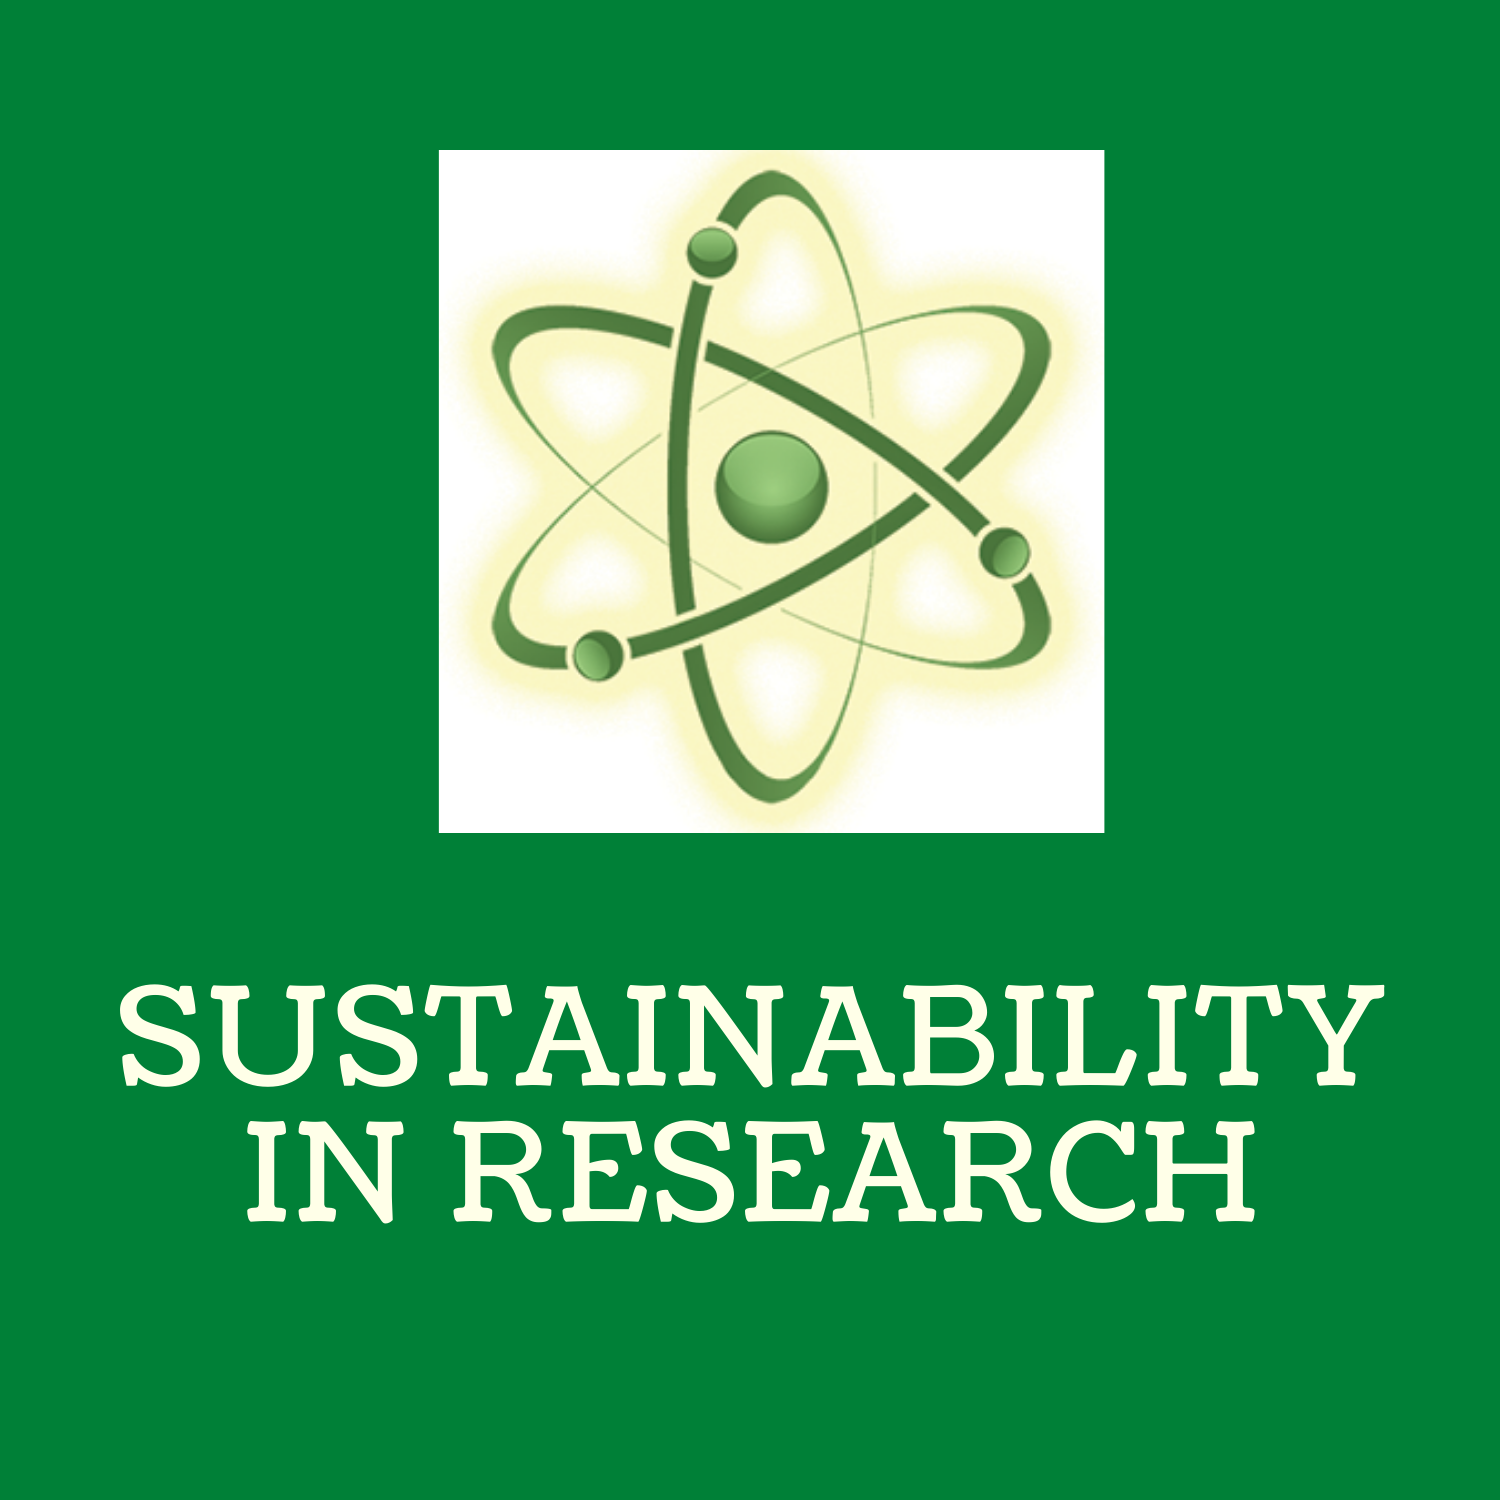 Sustainability in research